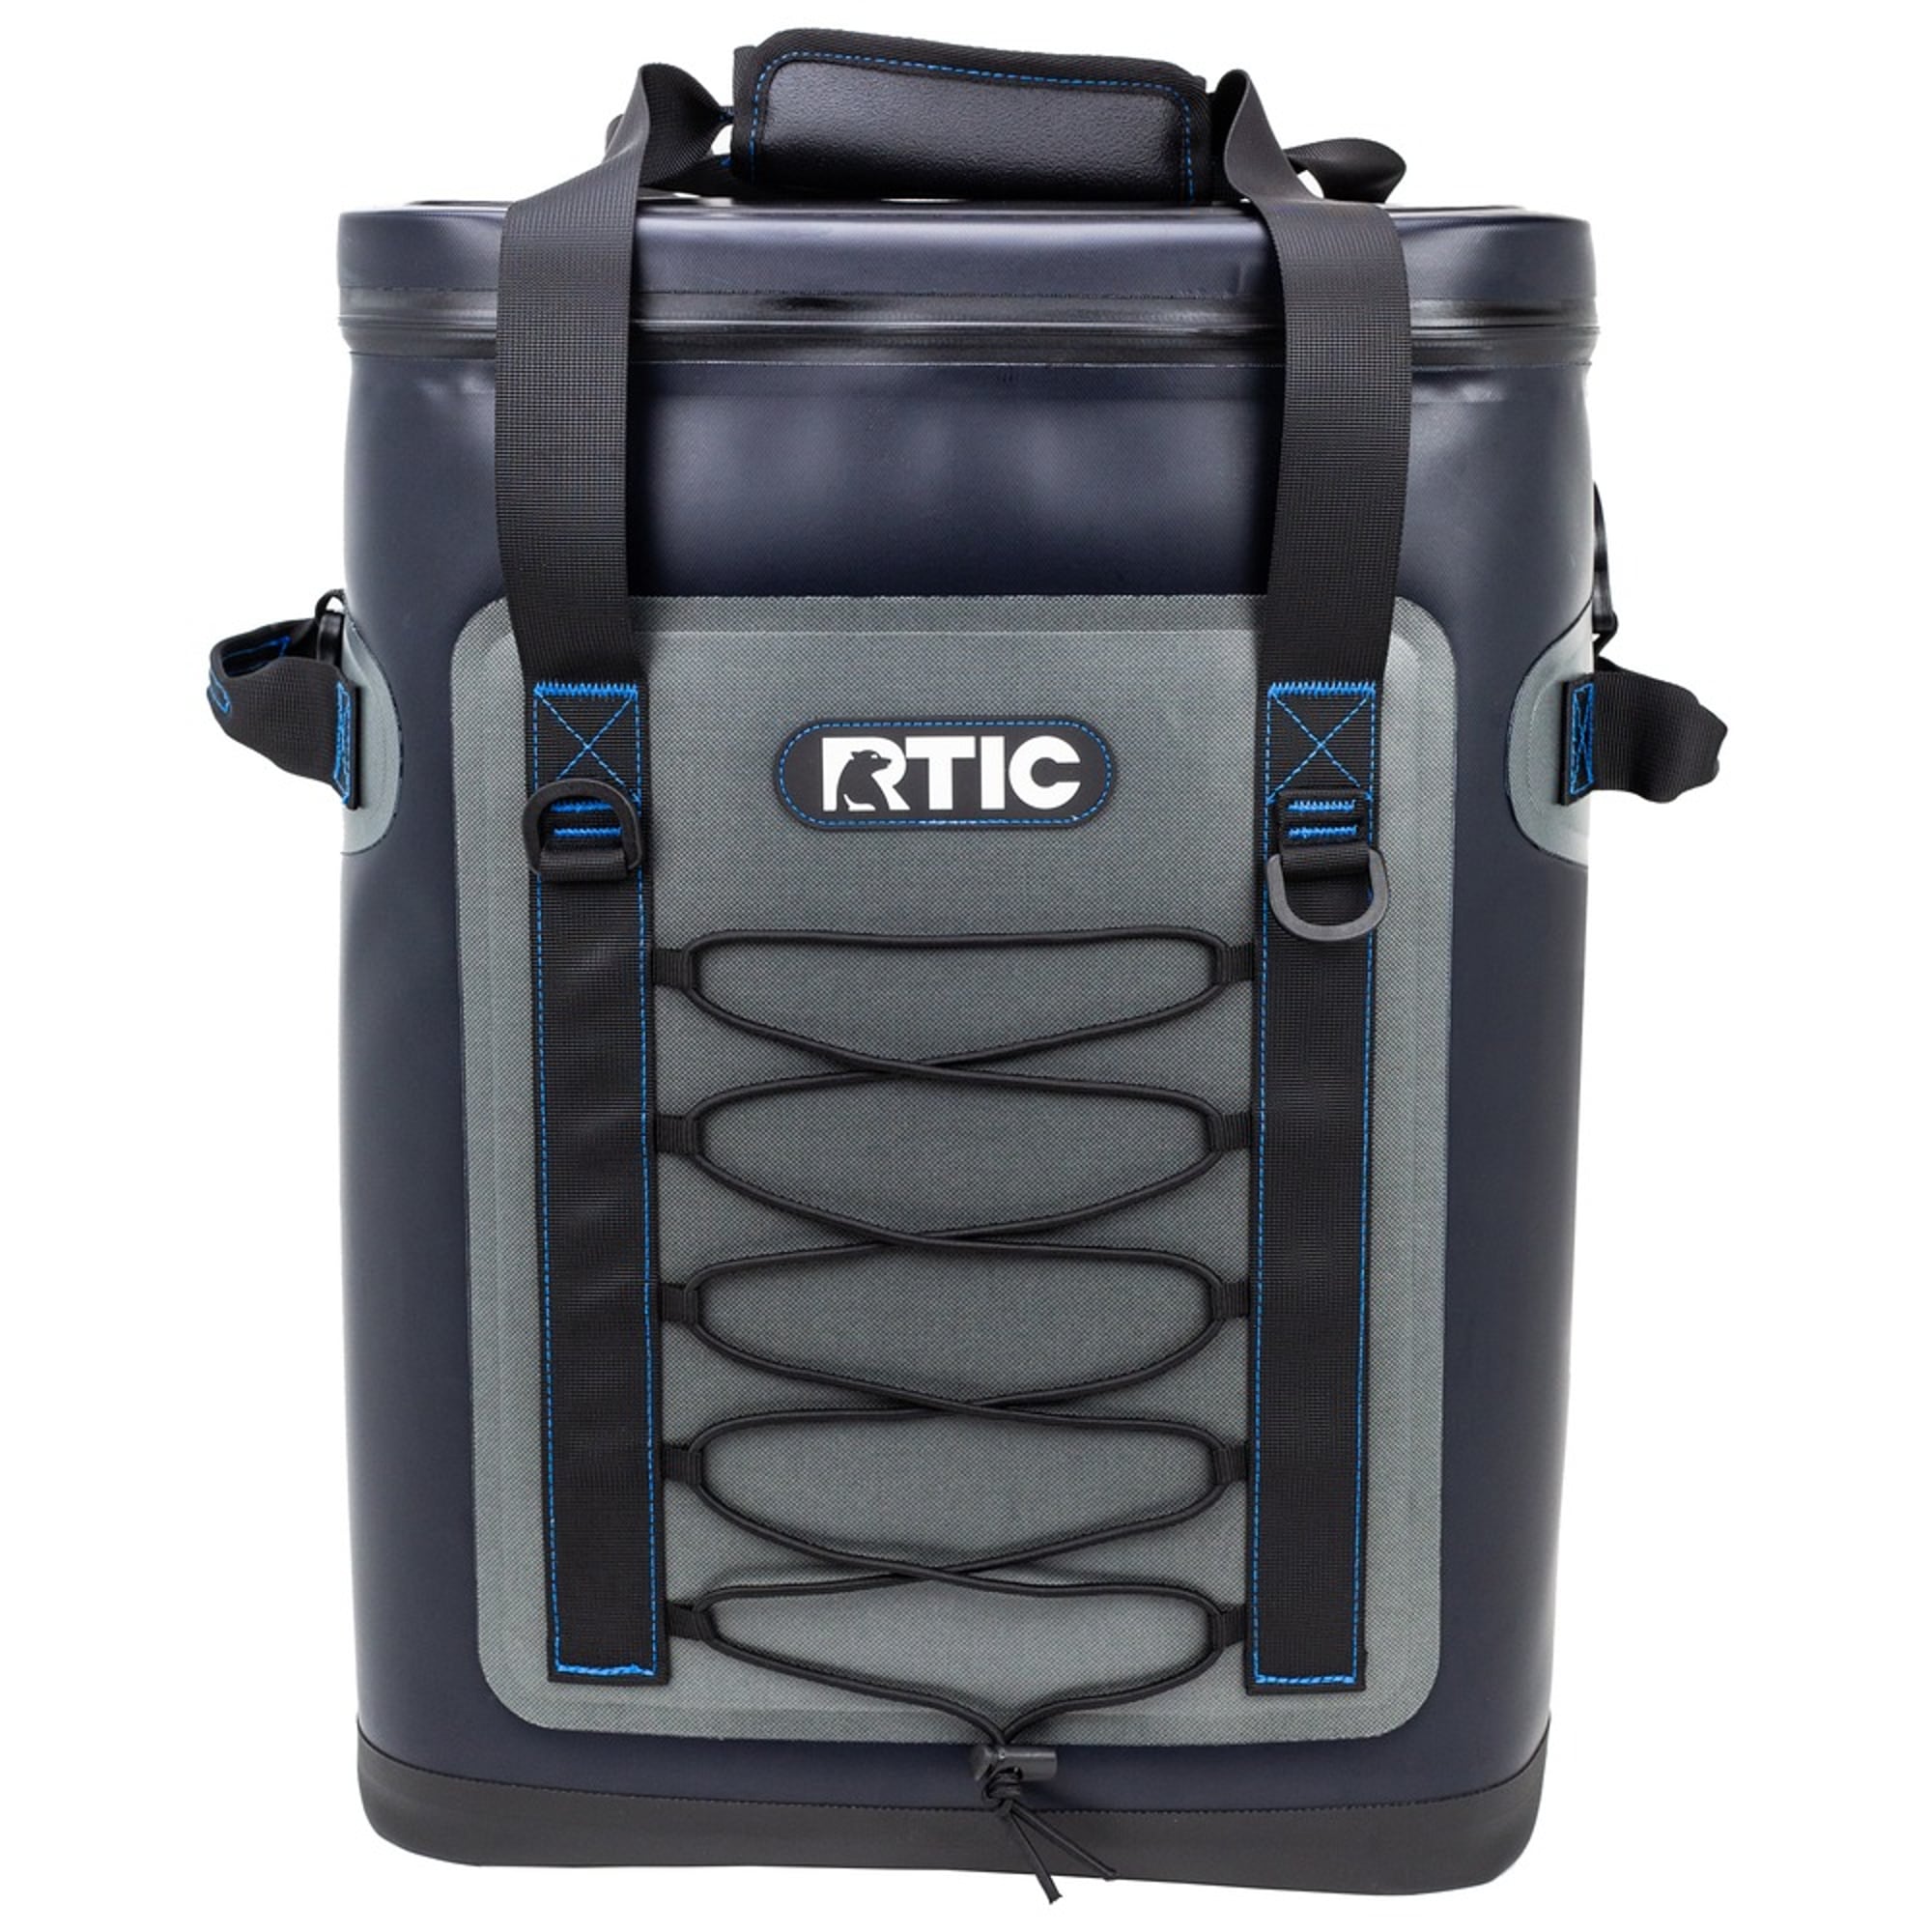 RTIC Rtic Soft Cooler 30 Can, Insulated Bag Portable Ice Chest Box